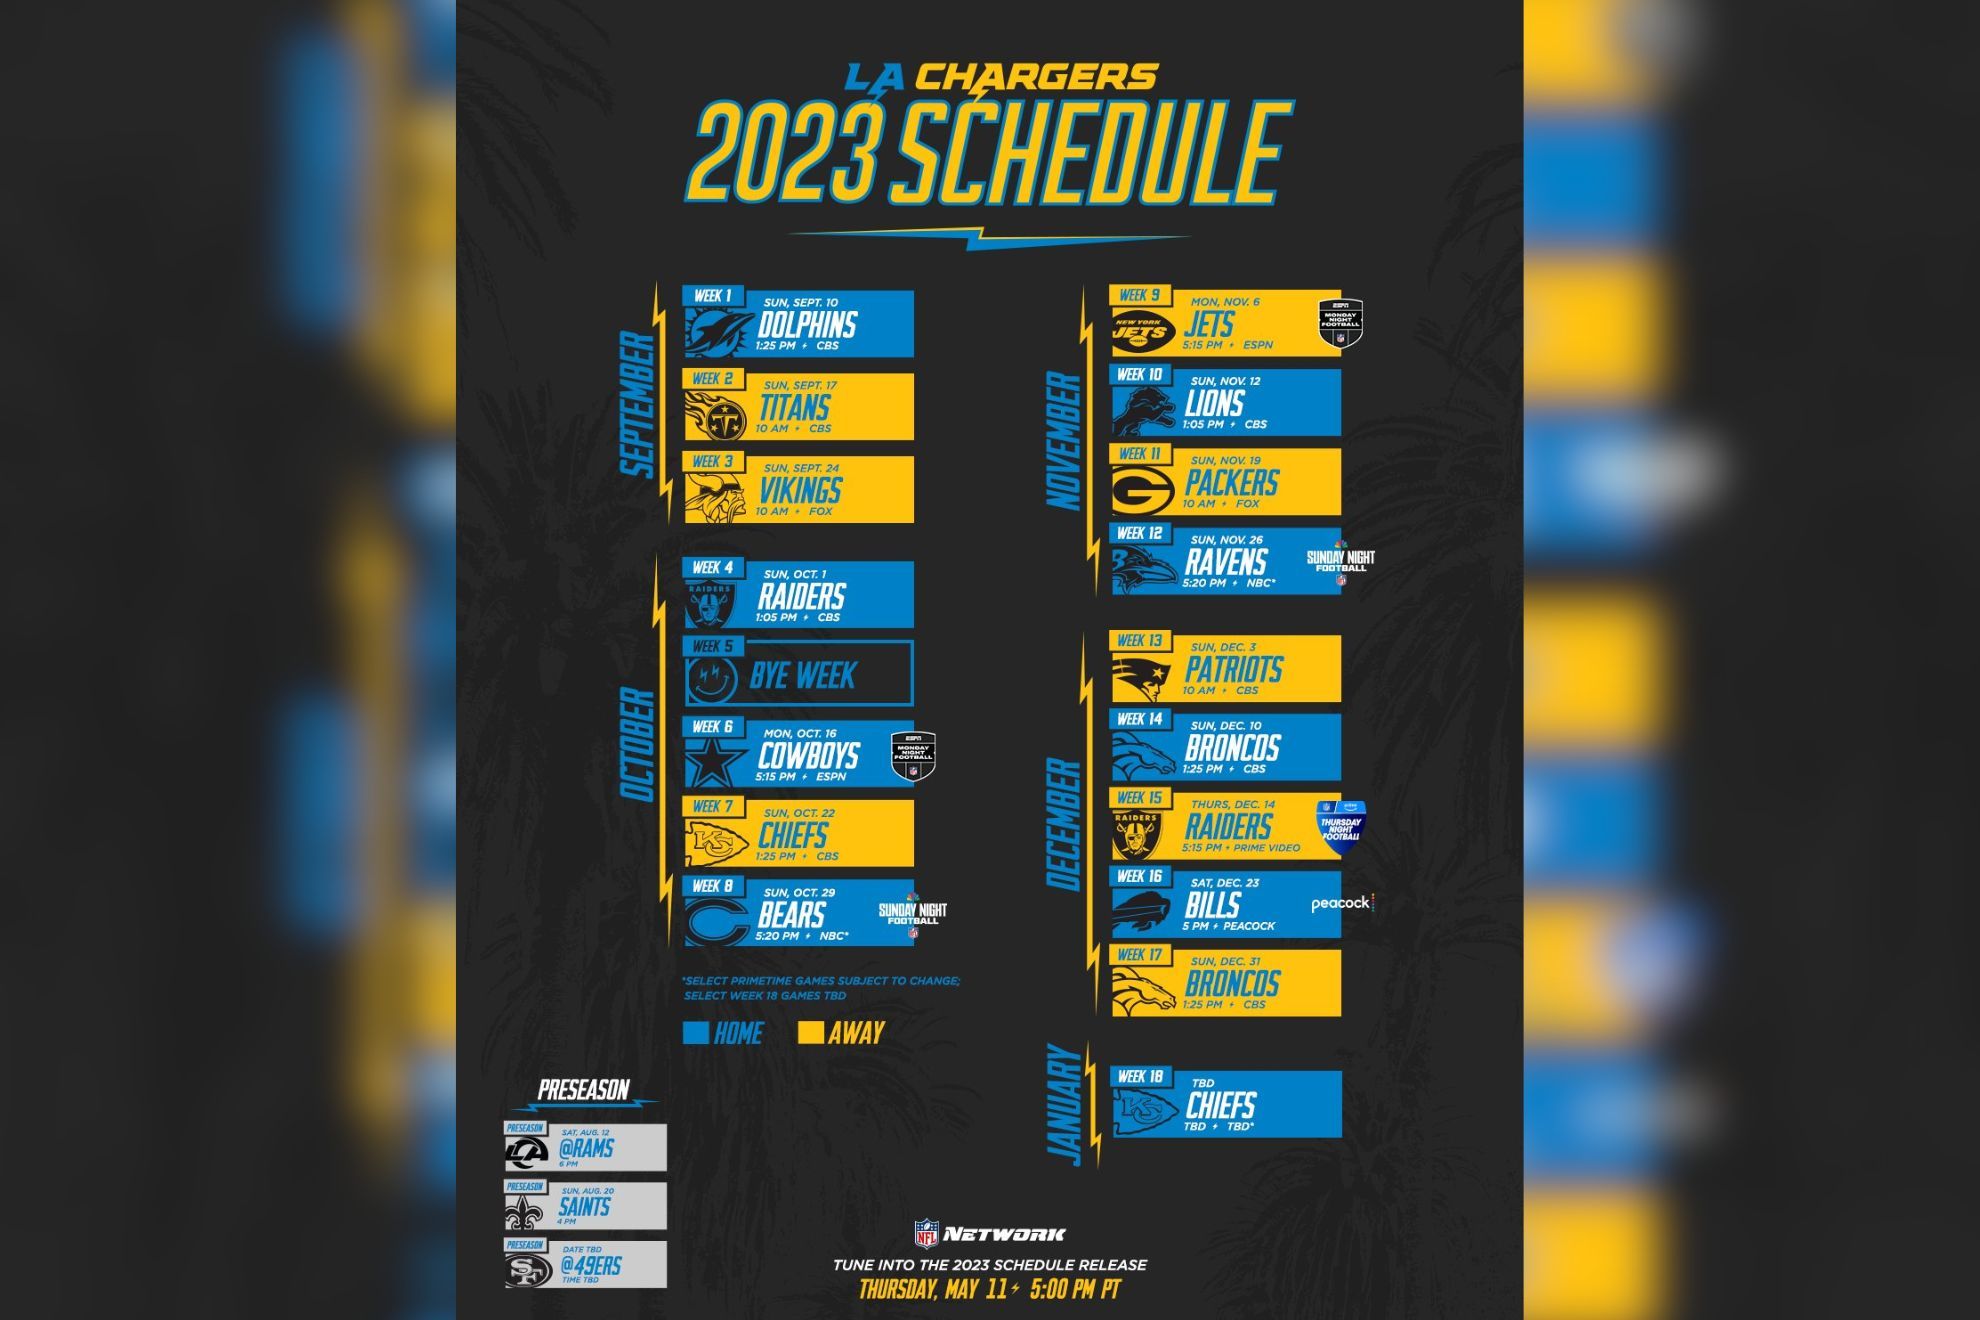 Los angeles chargers schedule for 2023 nfl season MARCA English